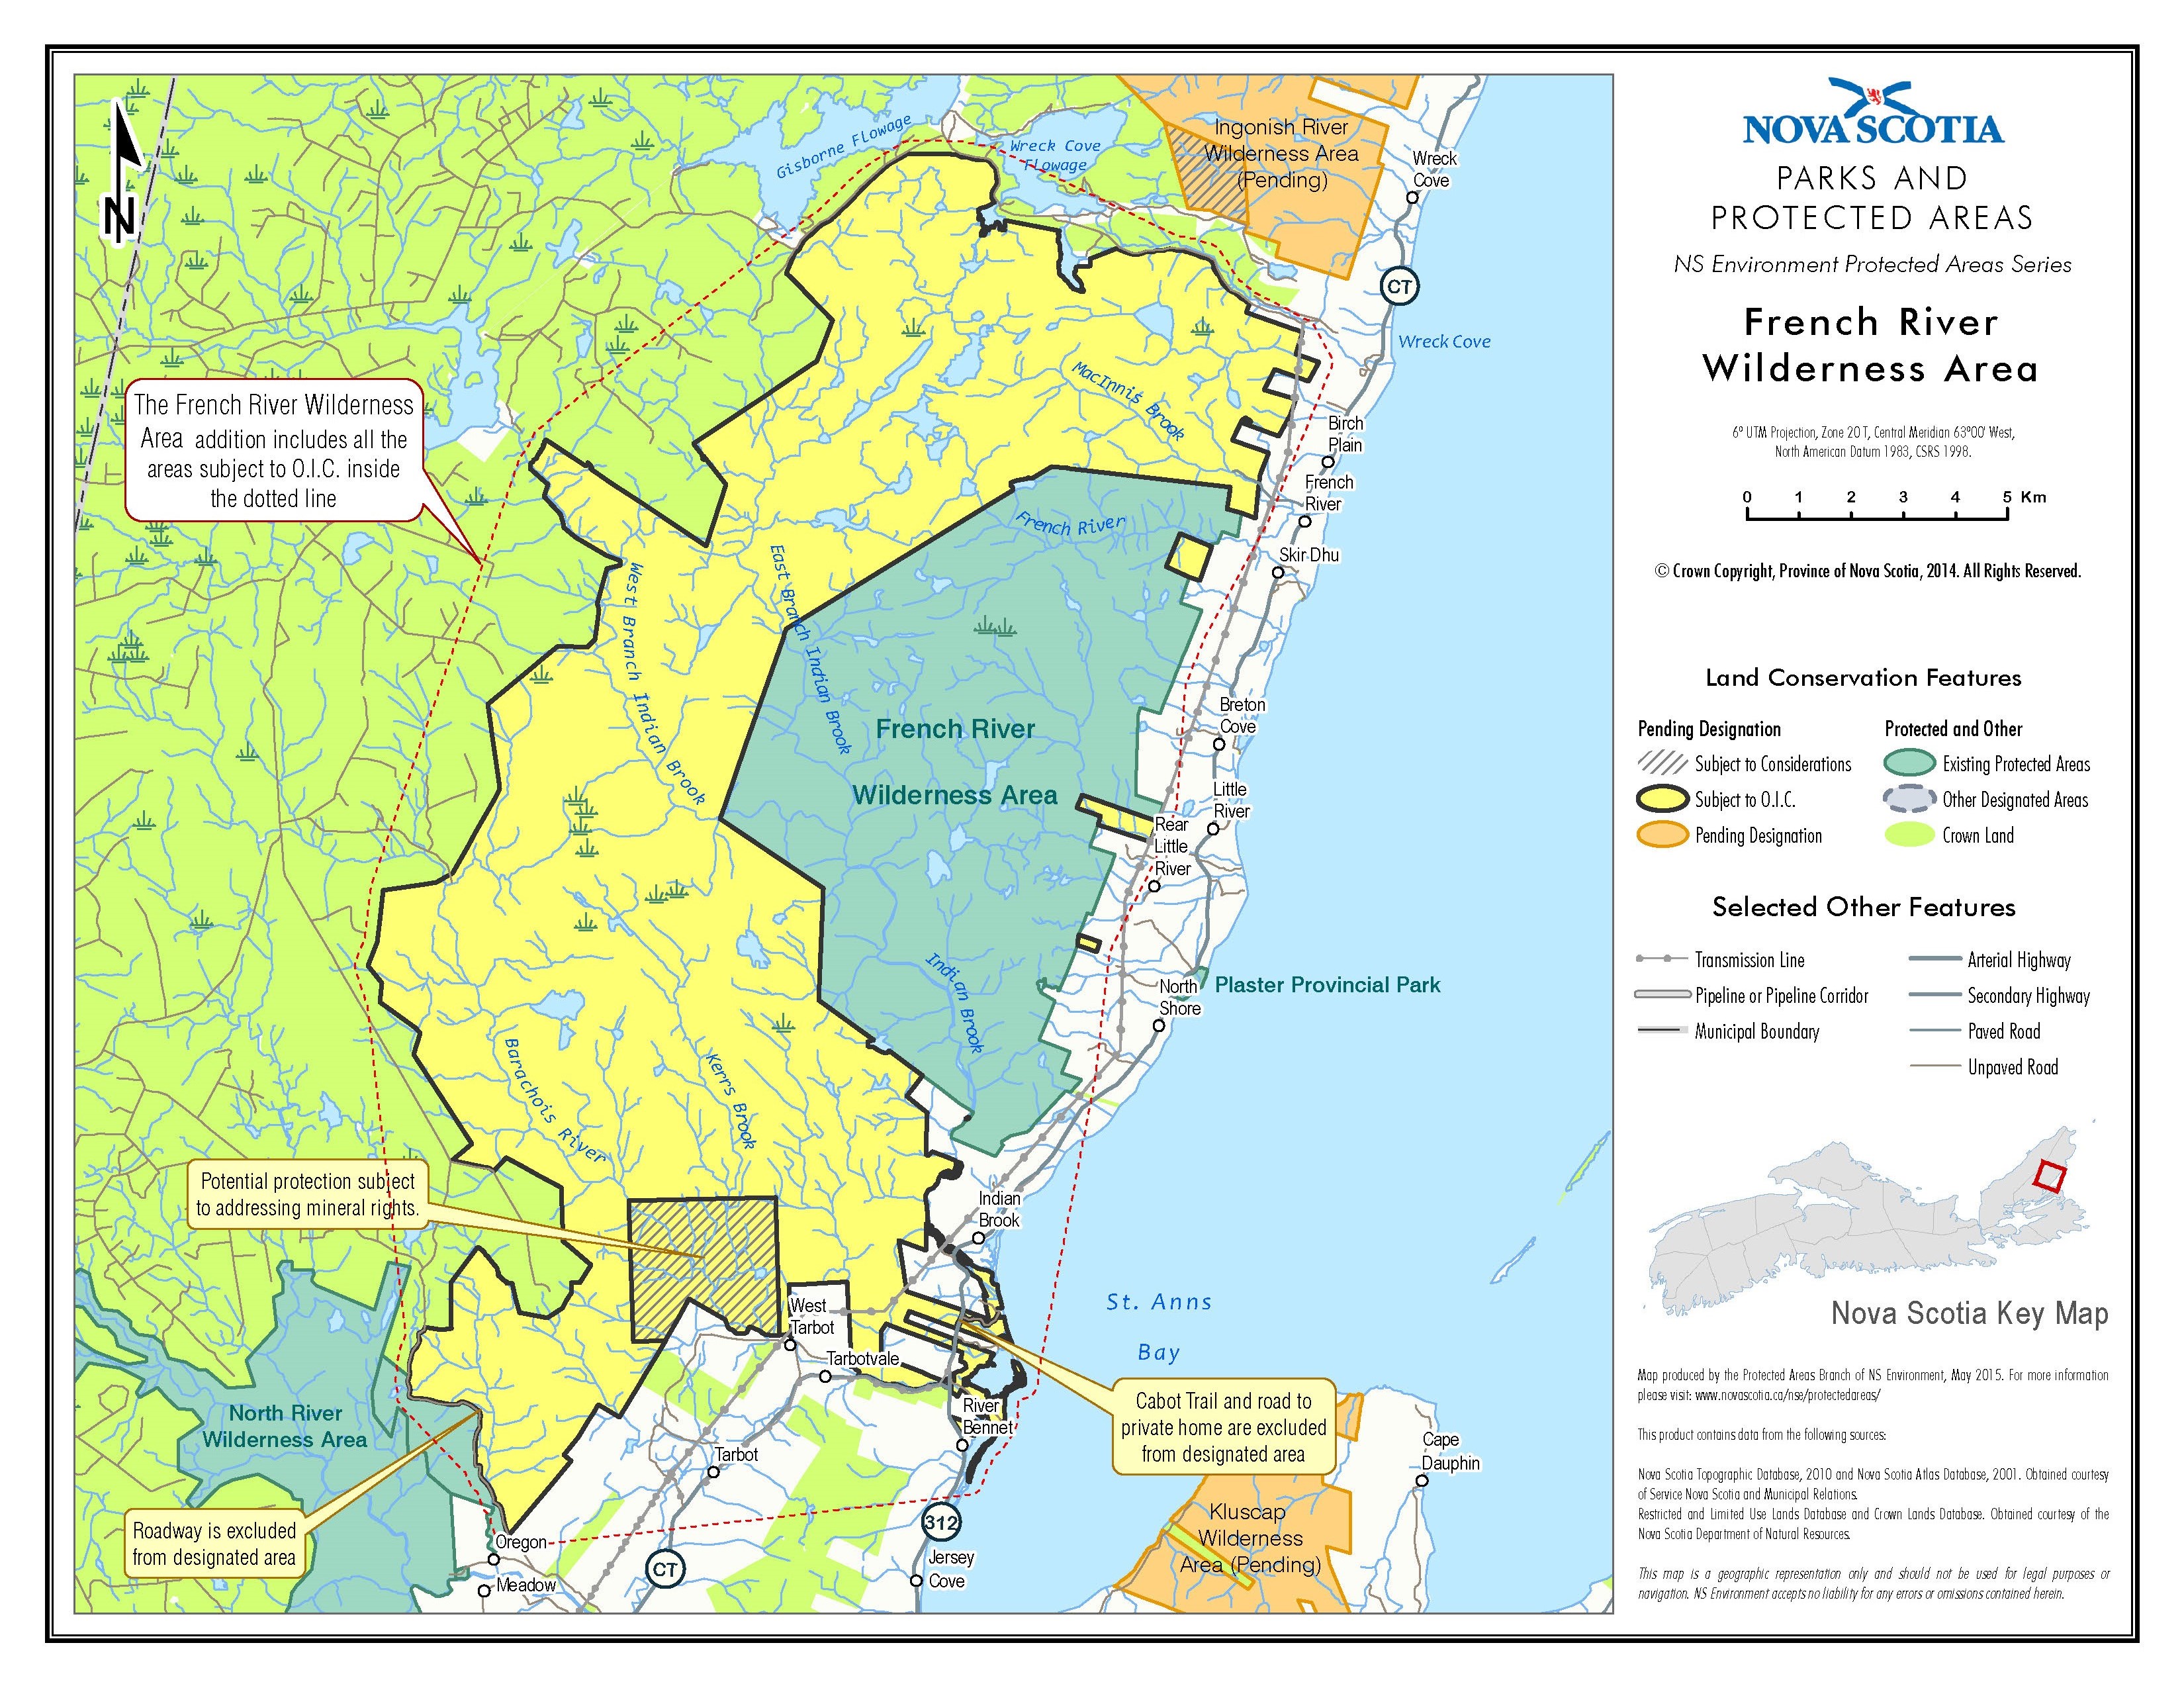 Approximate boundaries of French River Wilderness Area